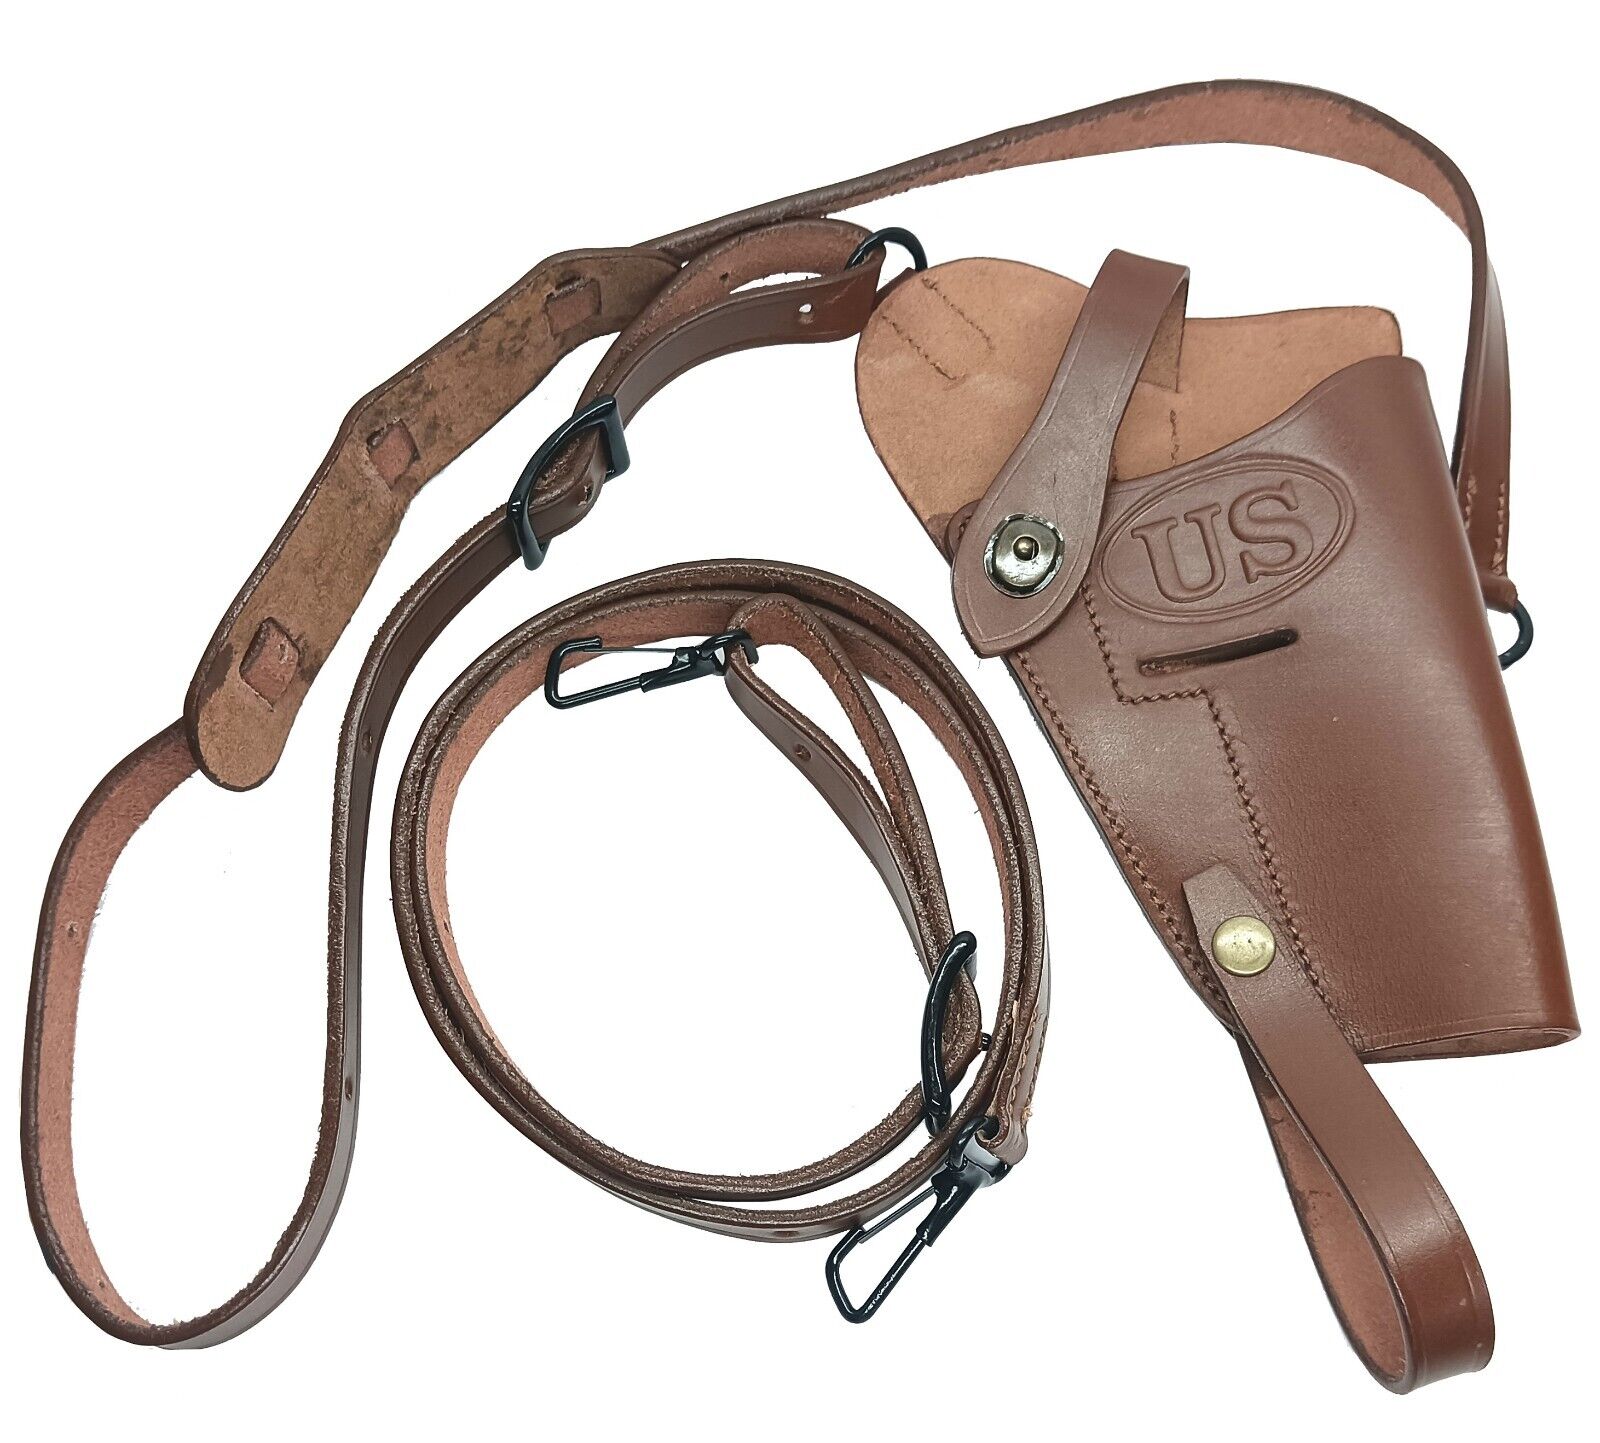 WWII US Army M7 Leather Shoulder Holster for Colt M 1911 45 acp Pistol Repro US